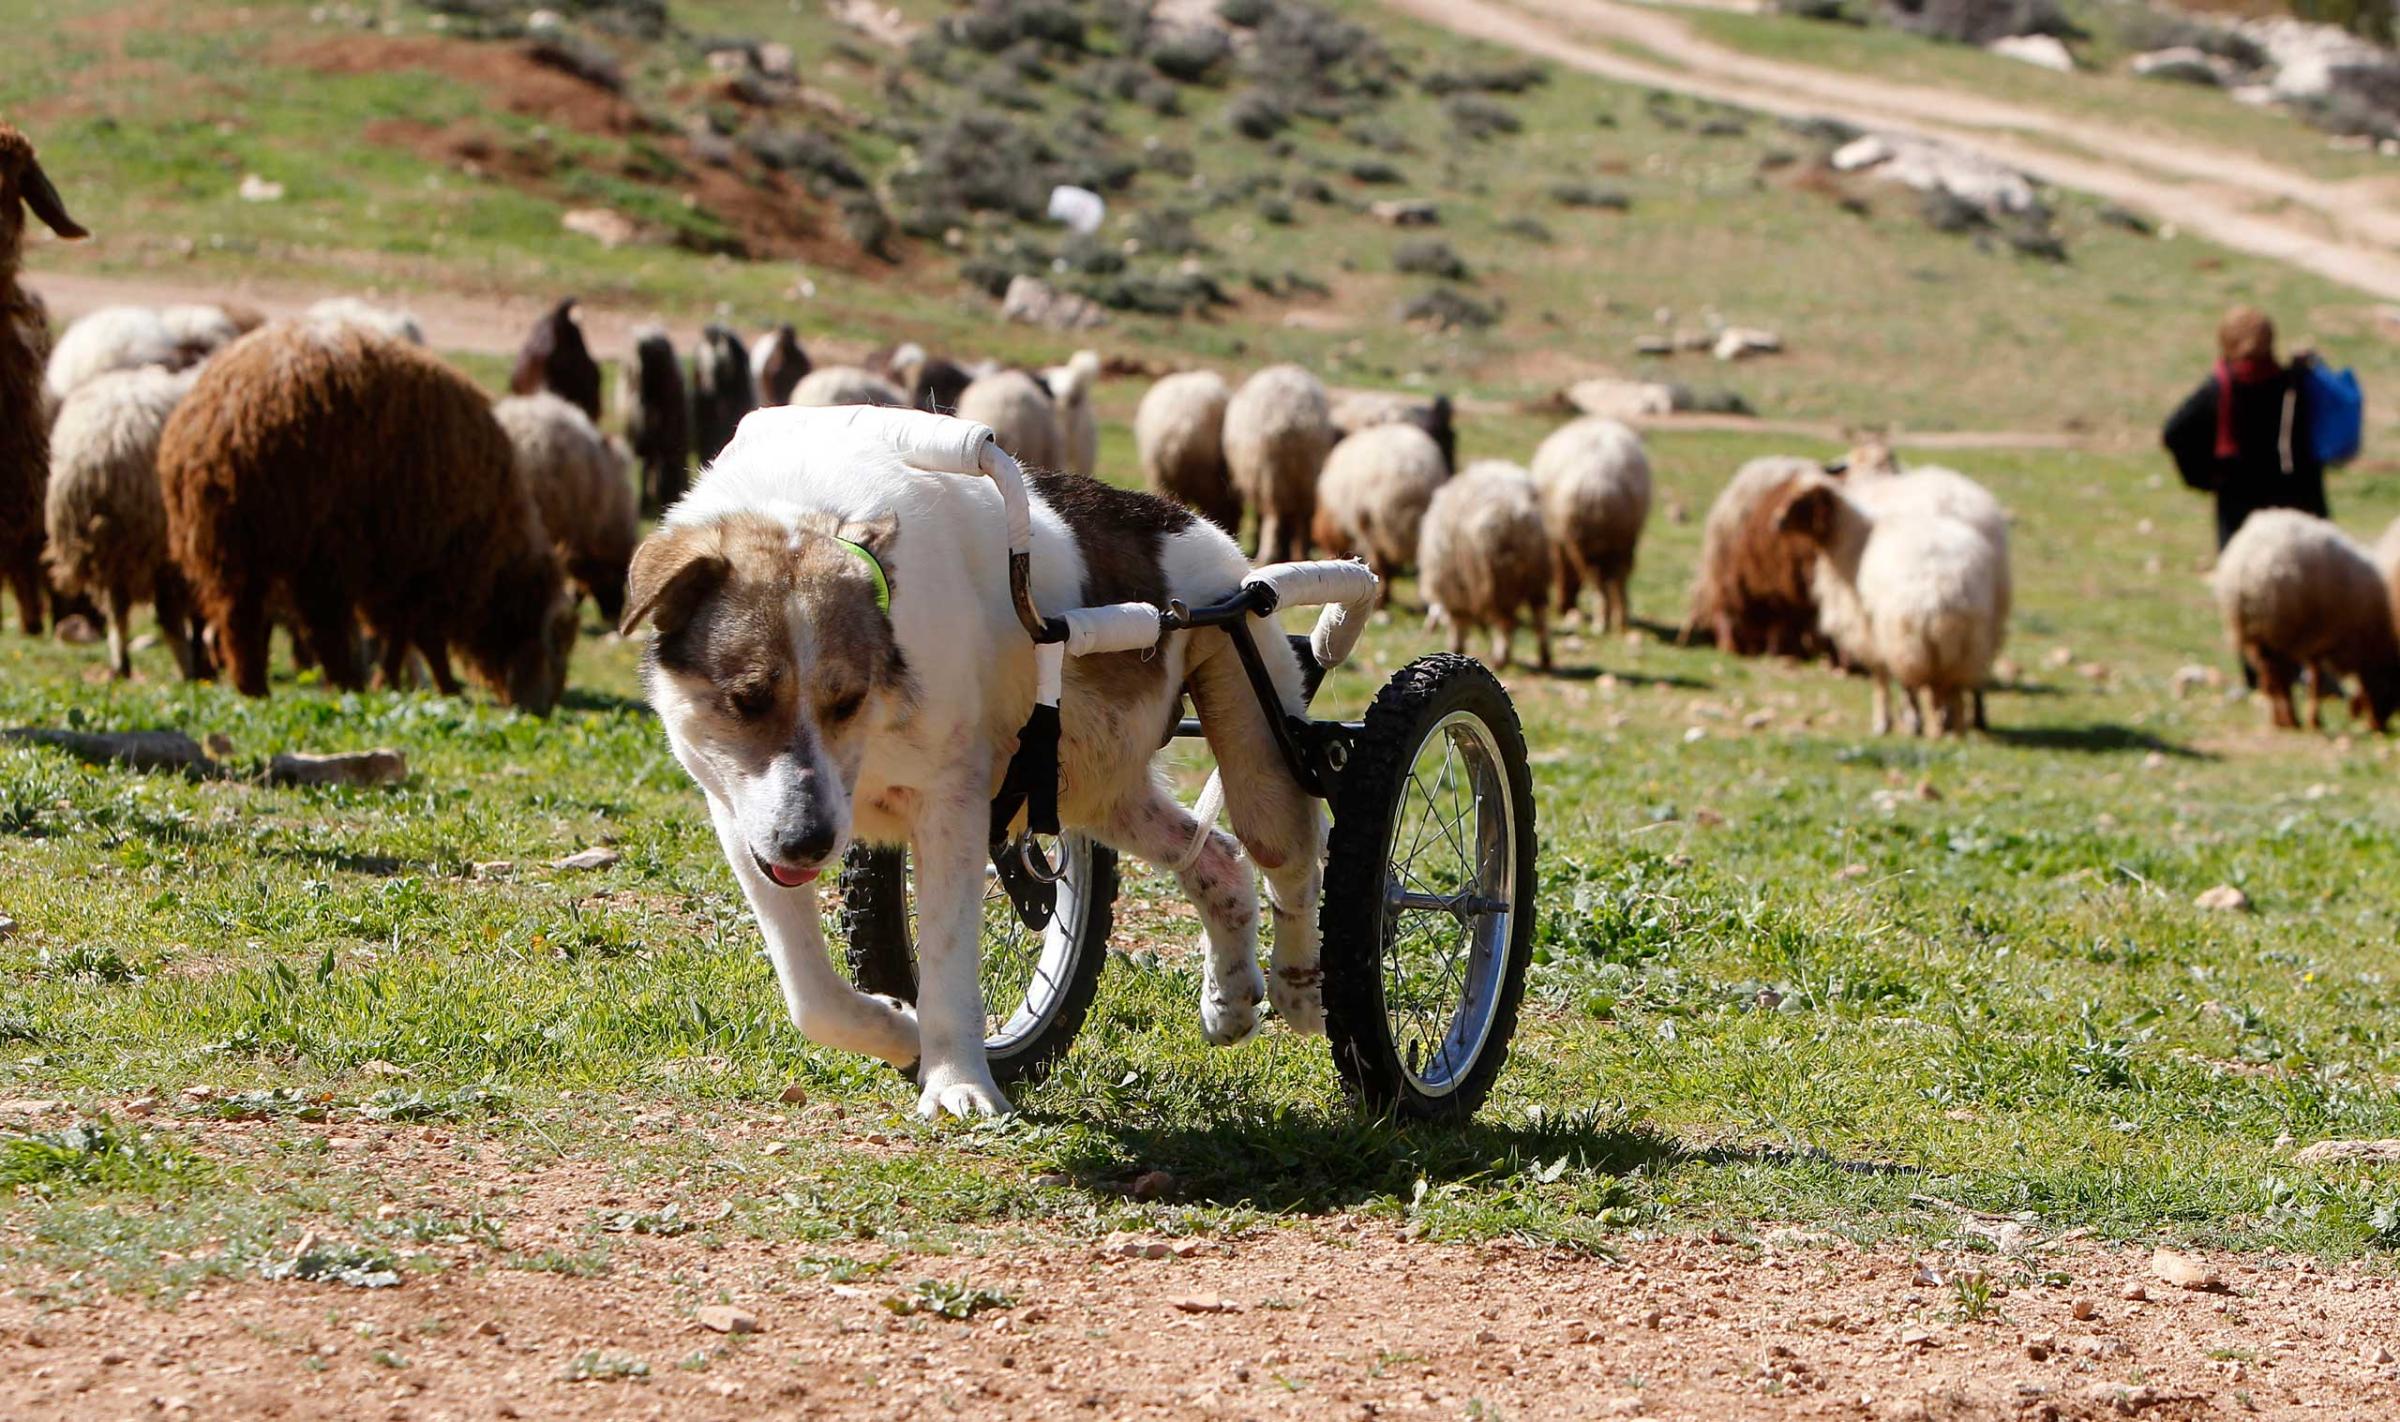 Abayed, a six-year-old herding dog, walks with a specially-made wheeled walking aid outside the Humane Center for Animal Welfare near Amman